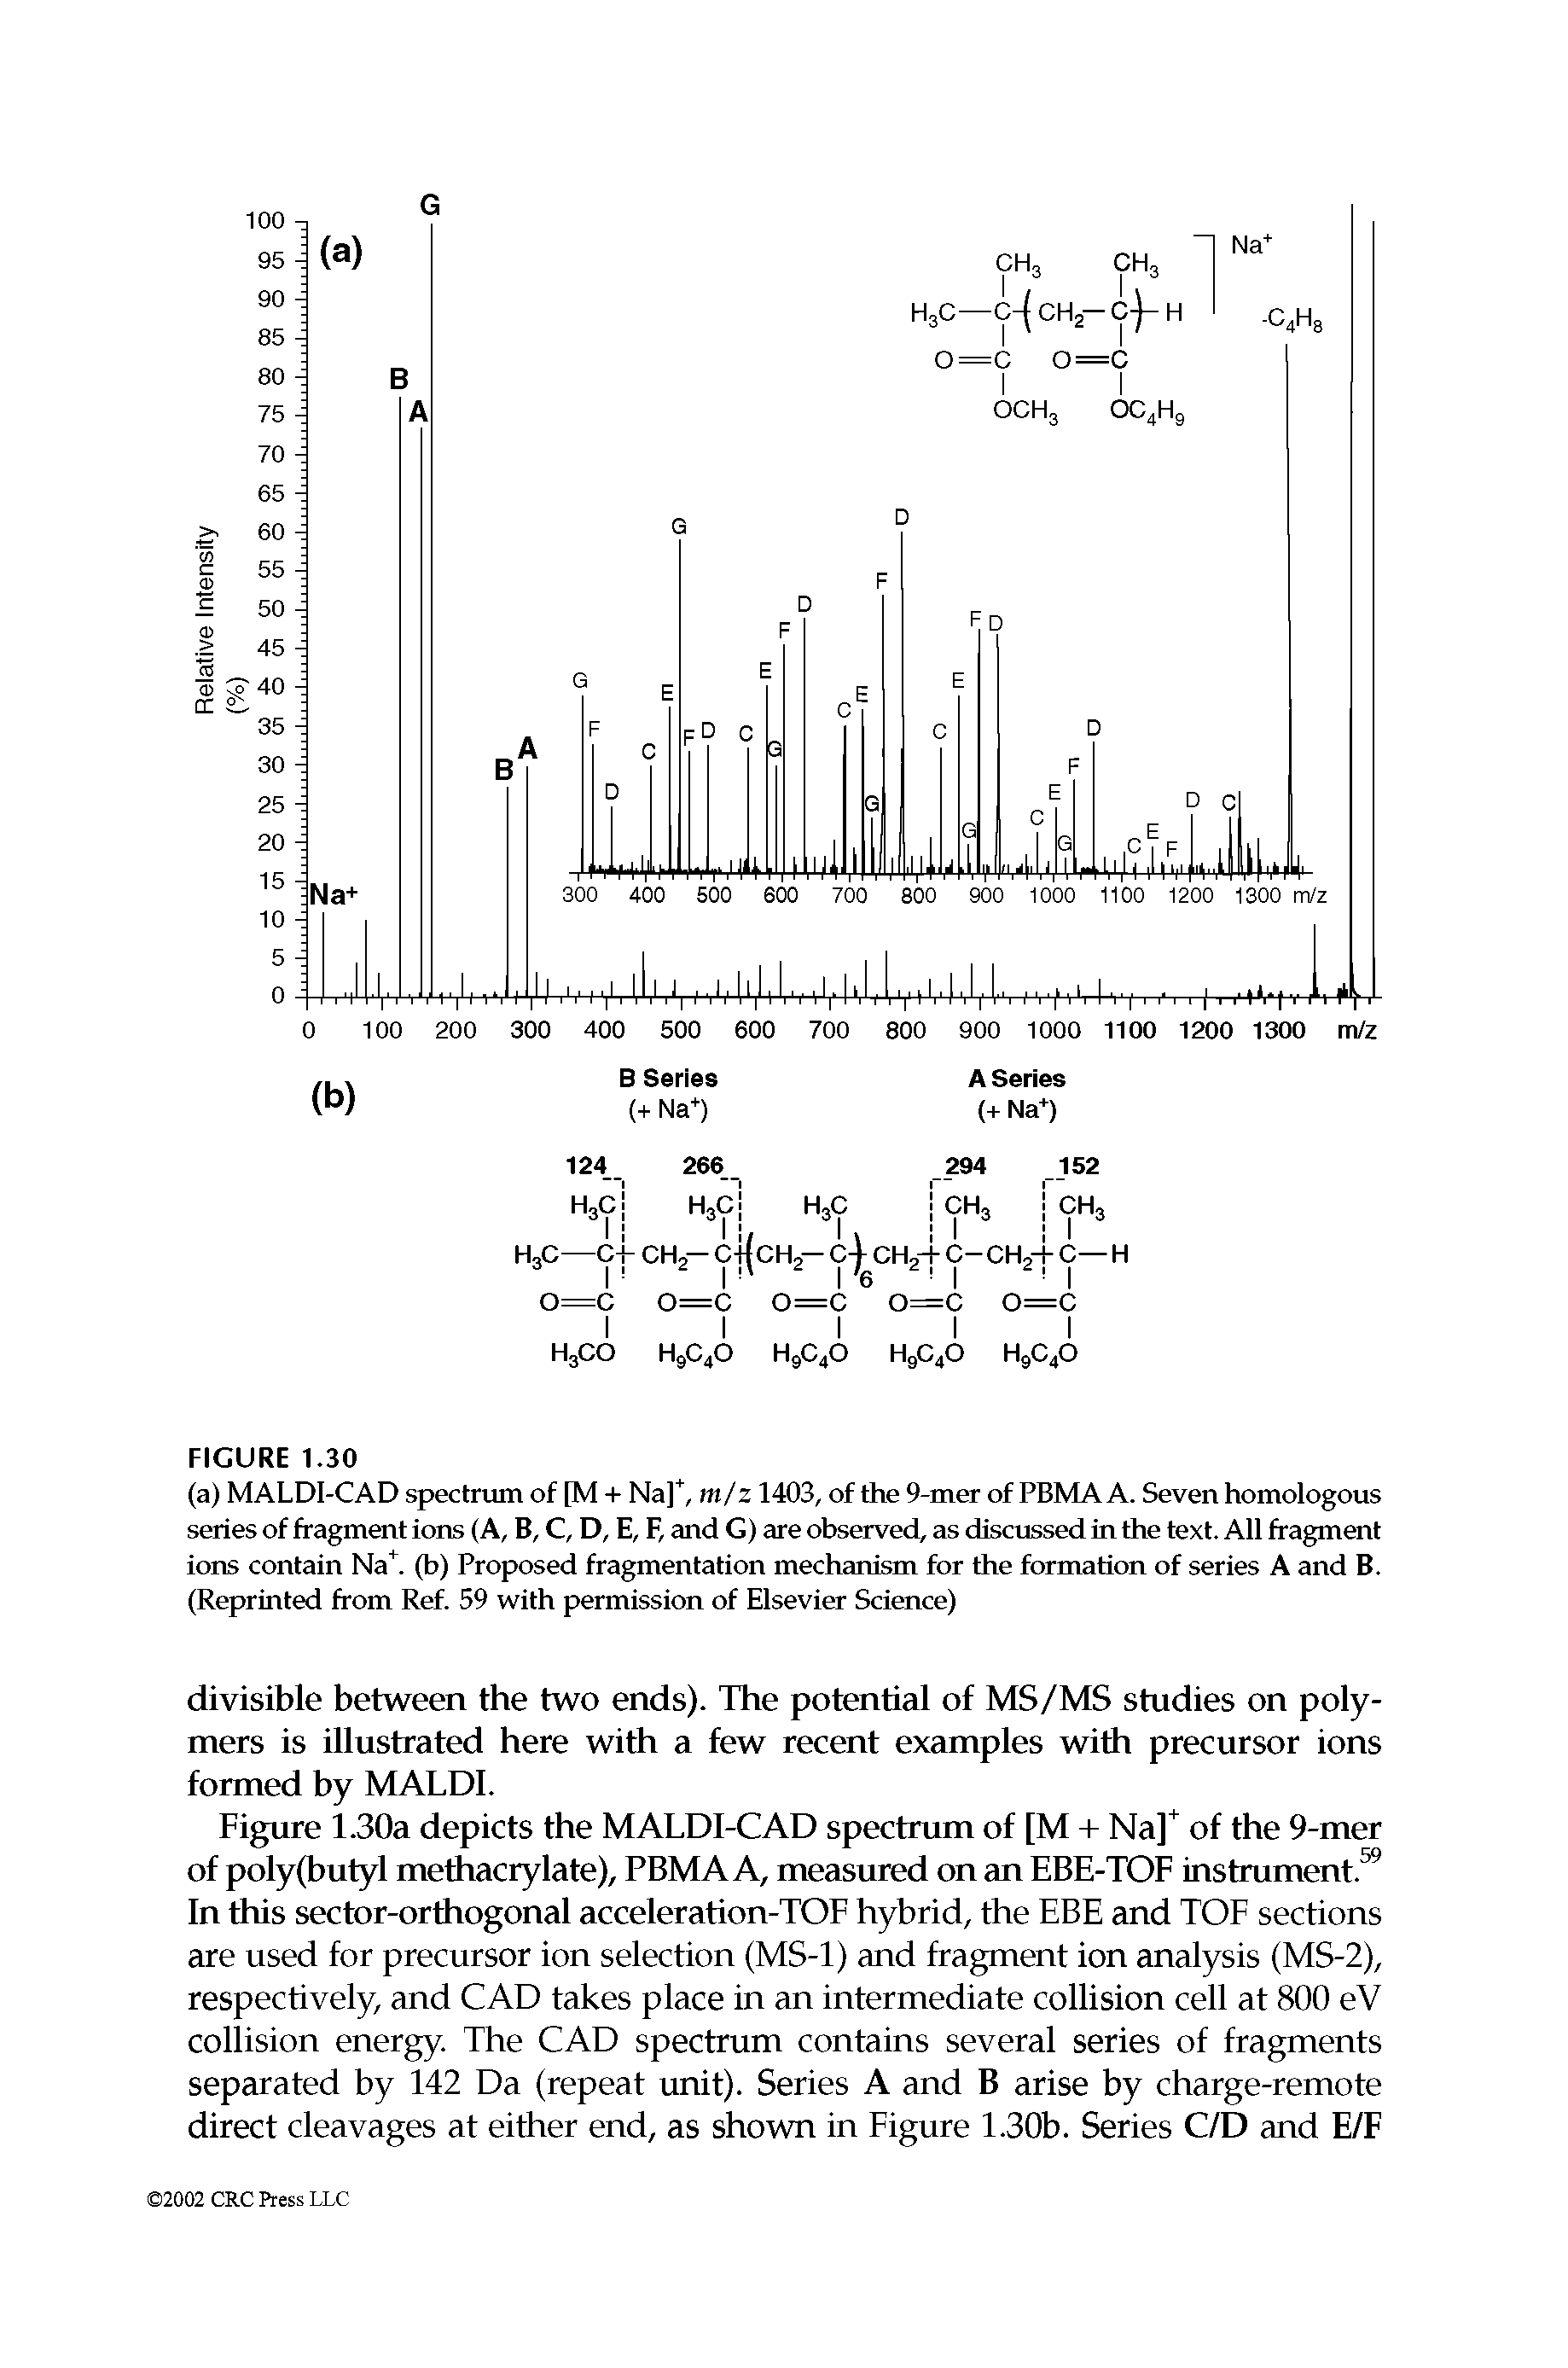 Figure 1.30a depicts the MALDI-CAD spectrum of [M + Na] of the 9-mer of poly(butyl methacrylate), PBMA A, measured on an EBE-TOF instrument. In this sector-orthogonal acceleration-TOF hybrid, the EBE and TOP sections are used for precursor ion selection (MS-1) and fragment ion analysis (MS-2), respectively, and CAD takes place in an intermediate collision cell at 800 eV collision energy. The CAD spectrum contains several series of fragments separated by 142 Da (repeat unit). Series A and B arise by charge-remote direct cleavages at either end, as shown in Figure 1.30b. Series C/D and E/F...